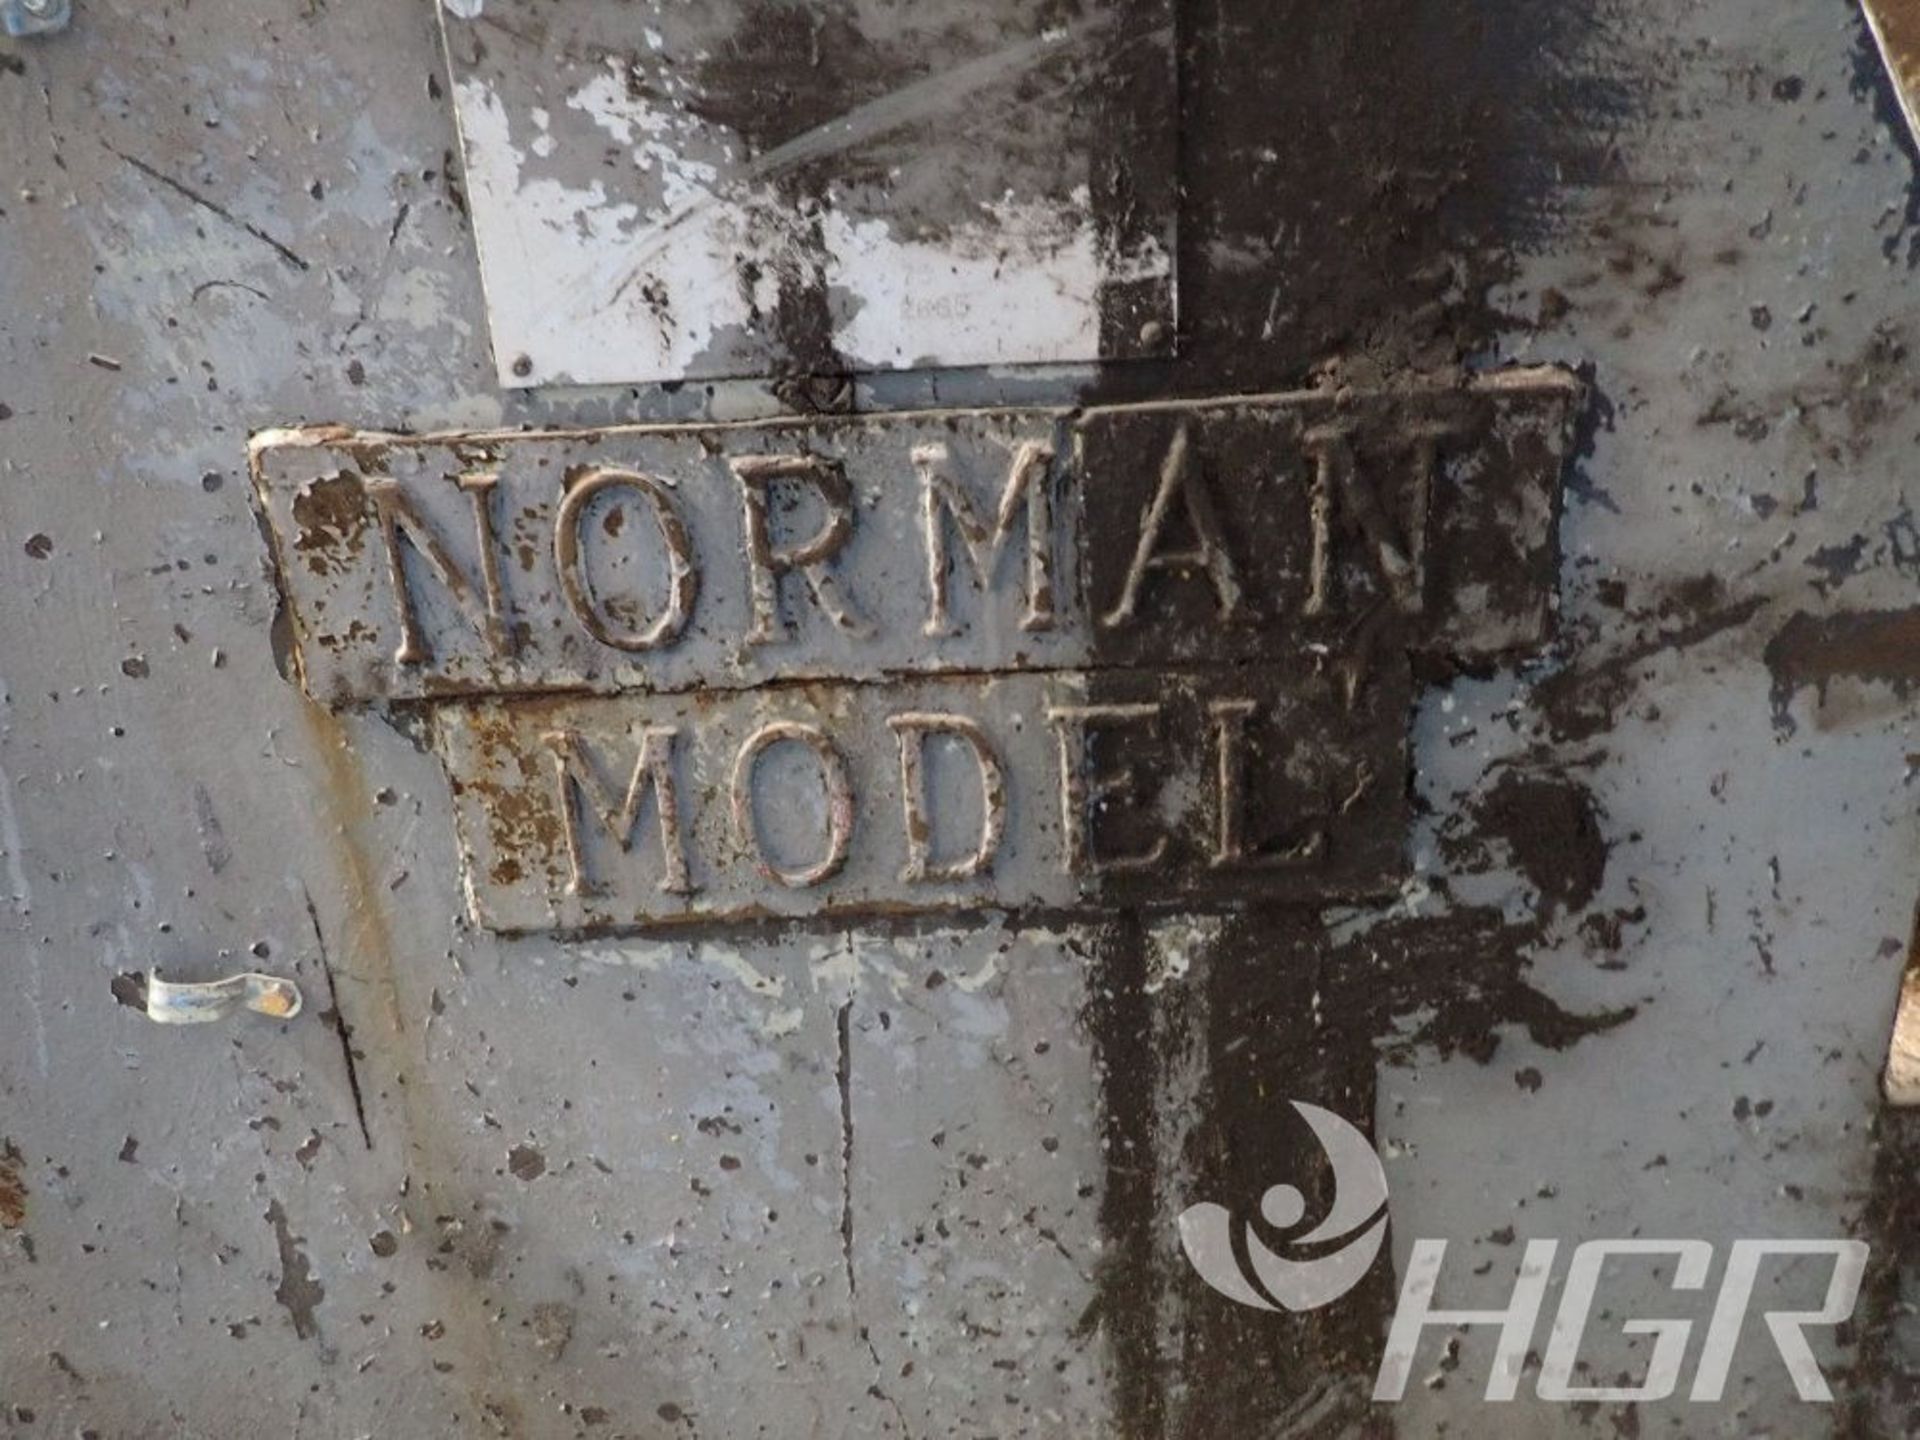 NORMAN MODEL CHIPPER, Model n/a, Date: n/a; s/n n/a, Approx. Capacity: 75", Power: n/a, Details: - Image 7 of 12